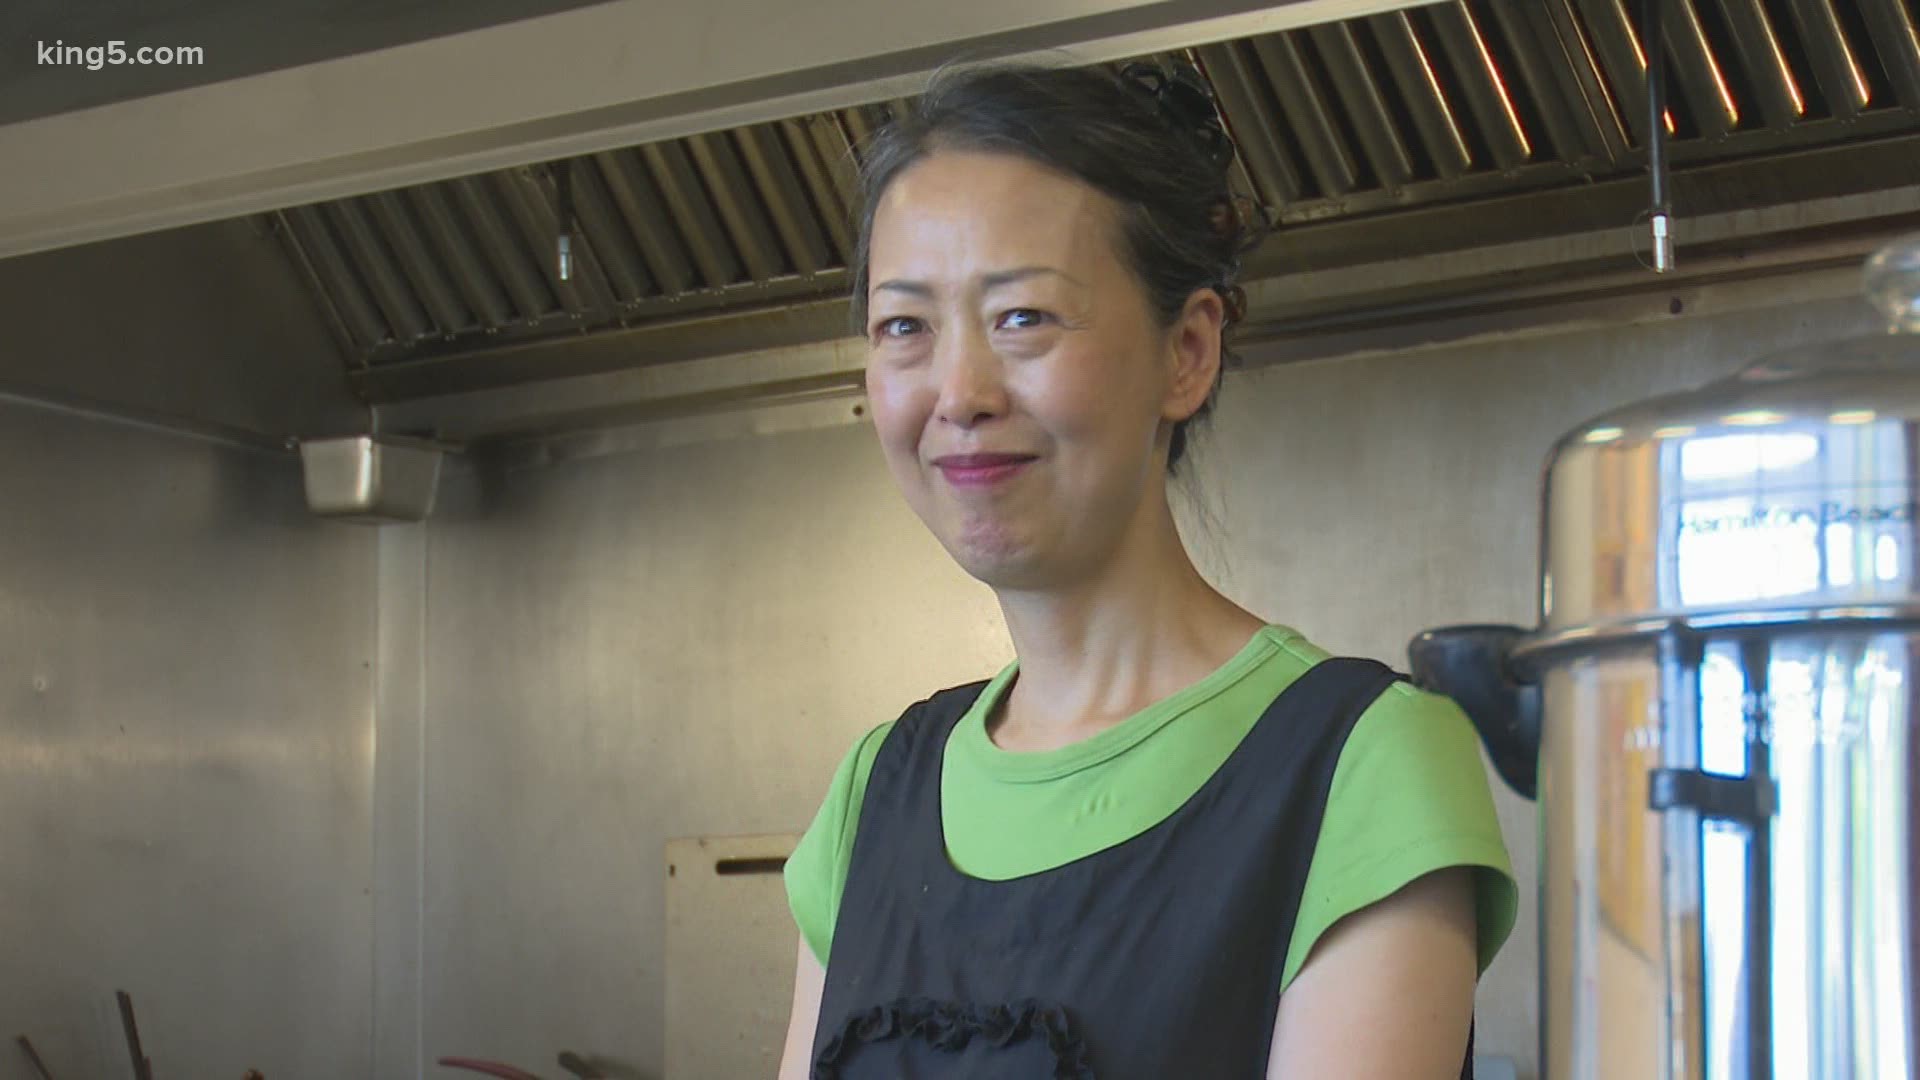 Sarah Kim's husband passed away in 2018 leaving her to run the restaurant by herself. Now COVID-19 has caused a slump in business.